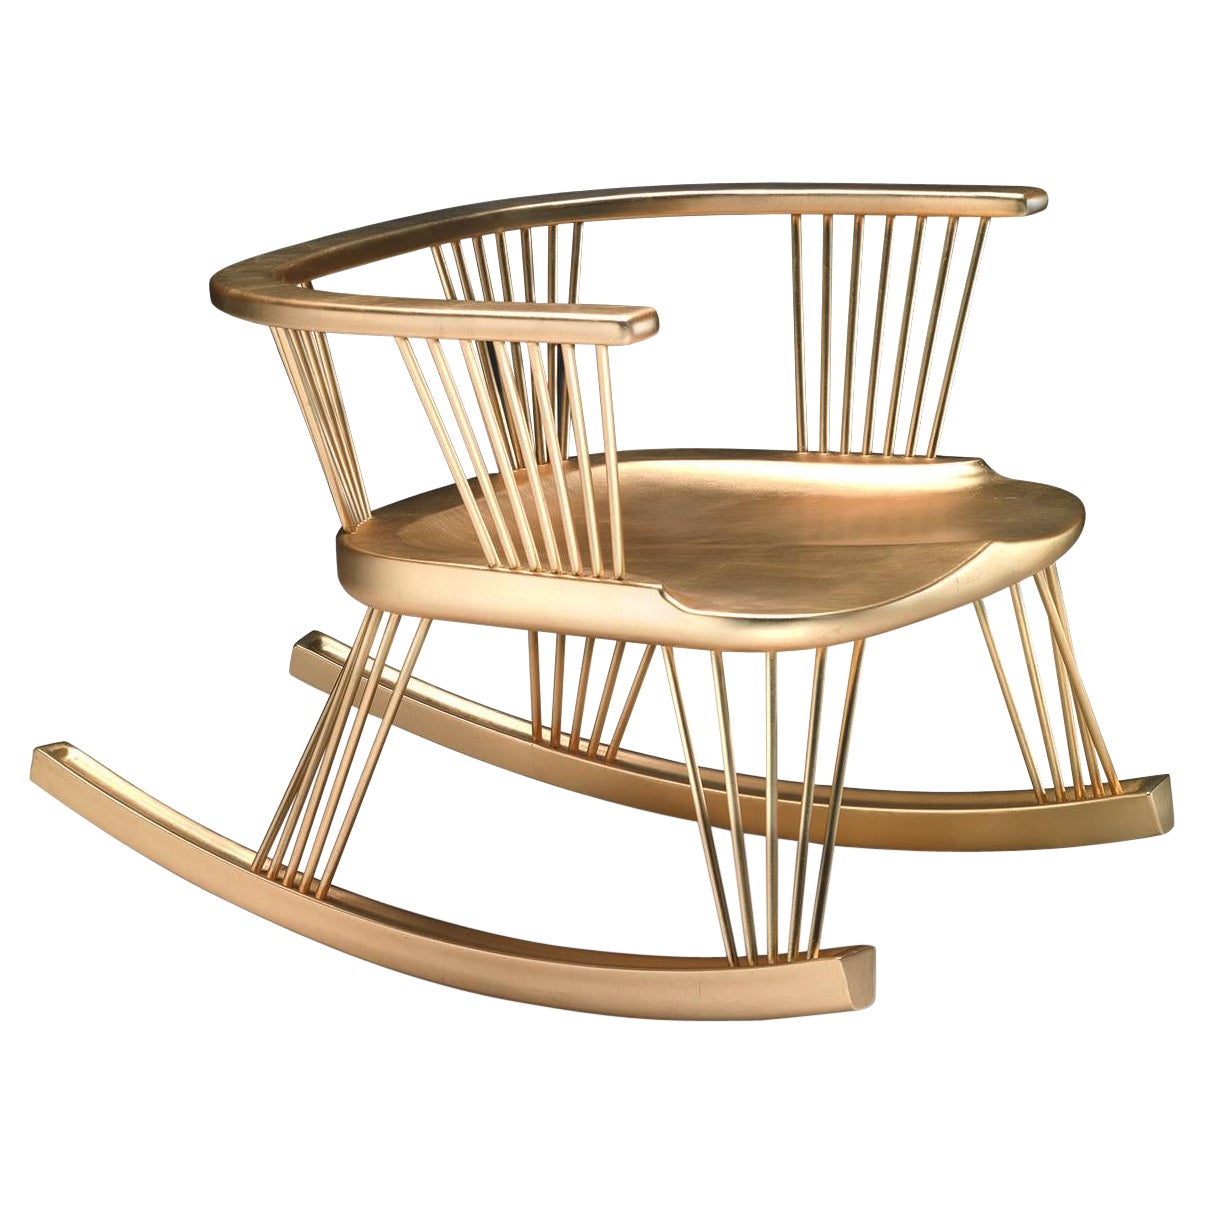 SITLALI Low Rocking Chair in Solid Wood and Thin Overlapping Road and Gold Leaf For Sale